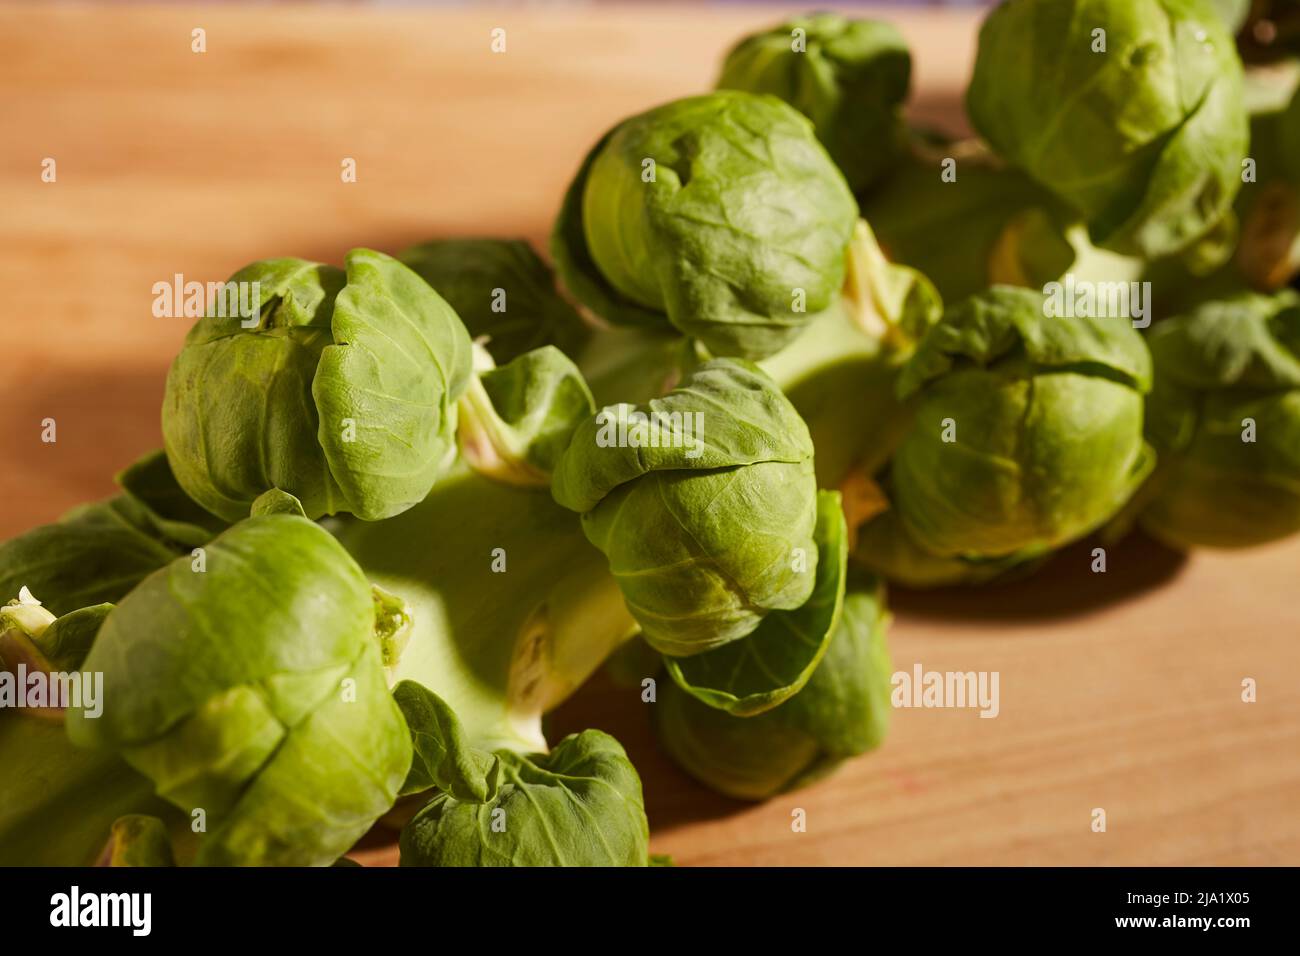 Raw, whole Brussels sprouts on their stalk grown in Lancaster, Pennsylvania, USA Stock Photo